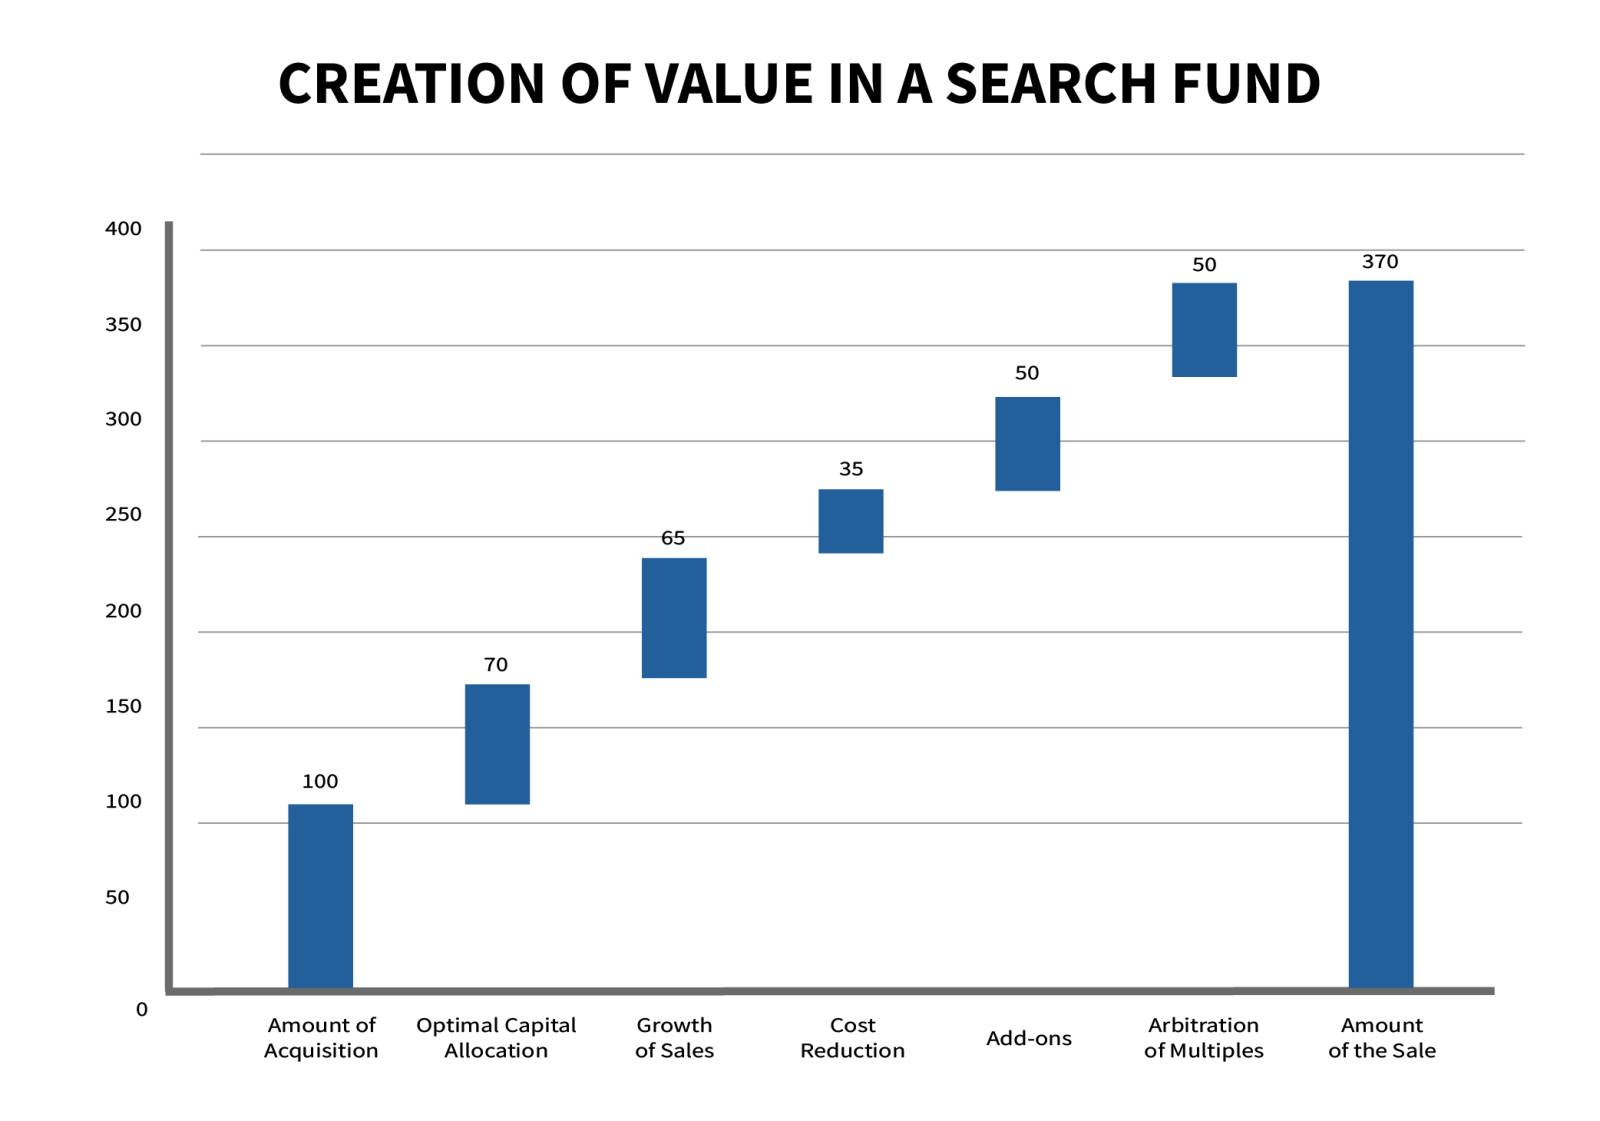 Creation of value in a Search Fund